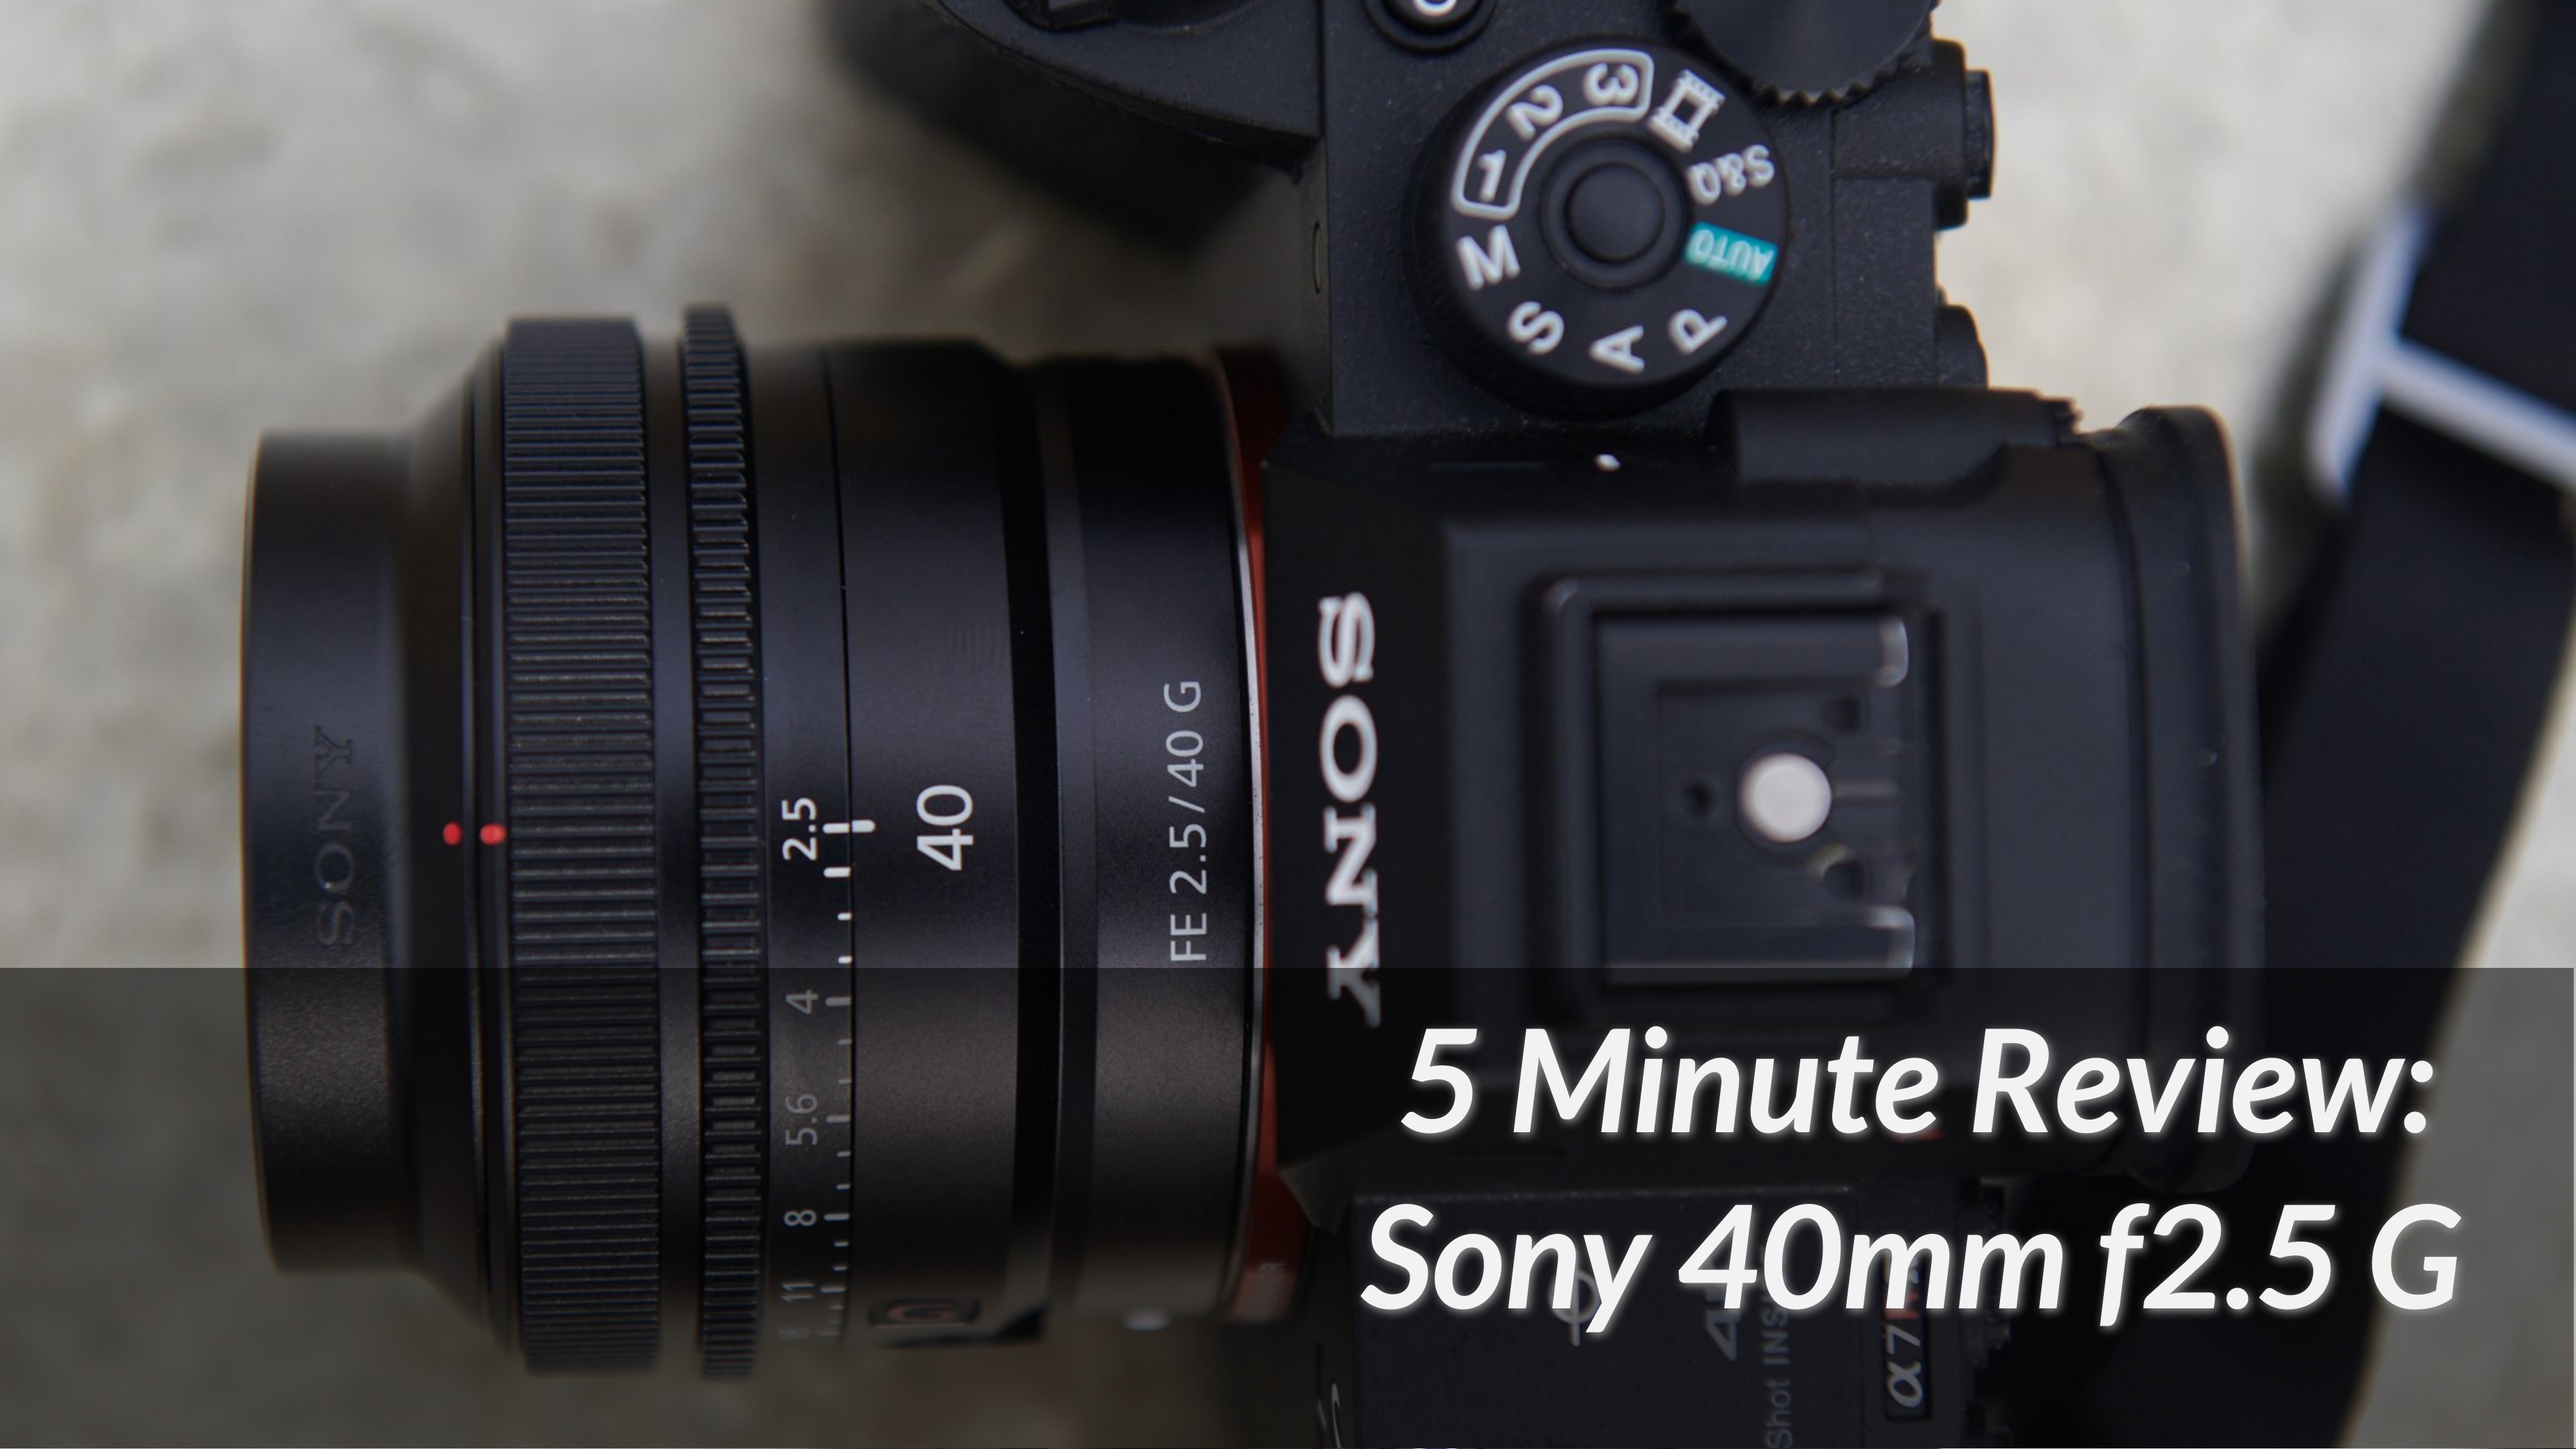 5 Minute Review: Is the Sony 40mm f2.5 G Worth it?